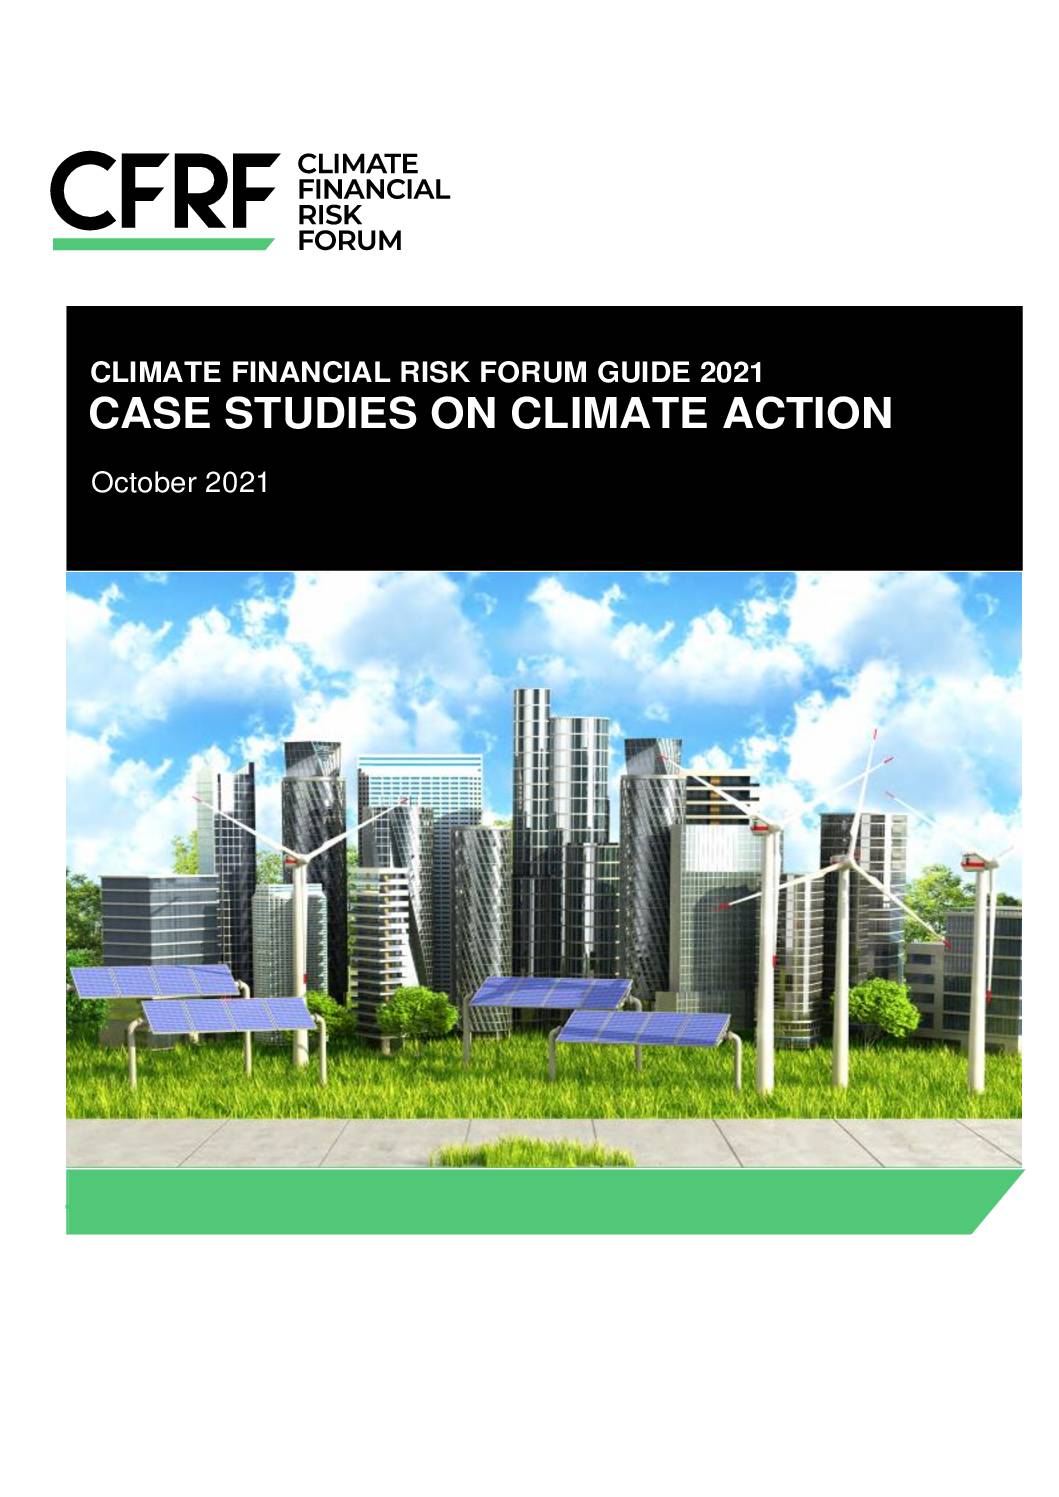 Climate Financial Risk Guide Forum Guide 2021: Case Studies on Climate Action